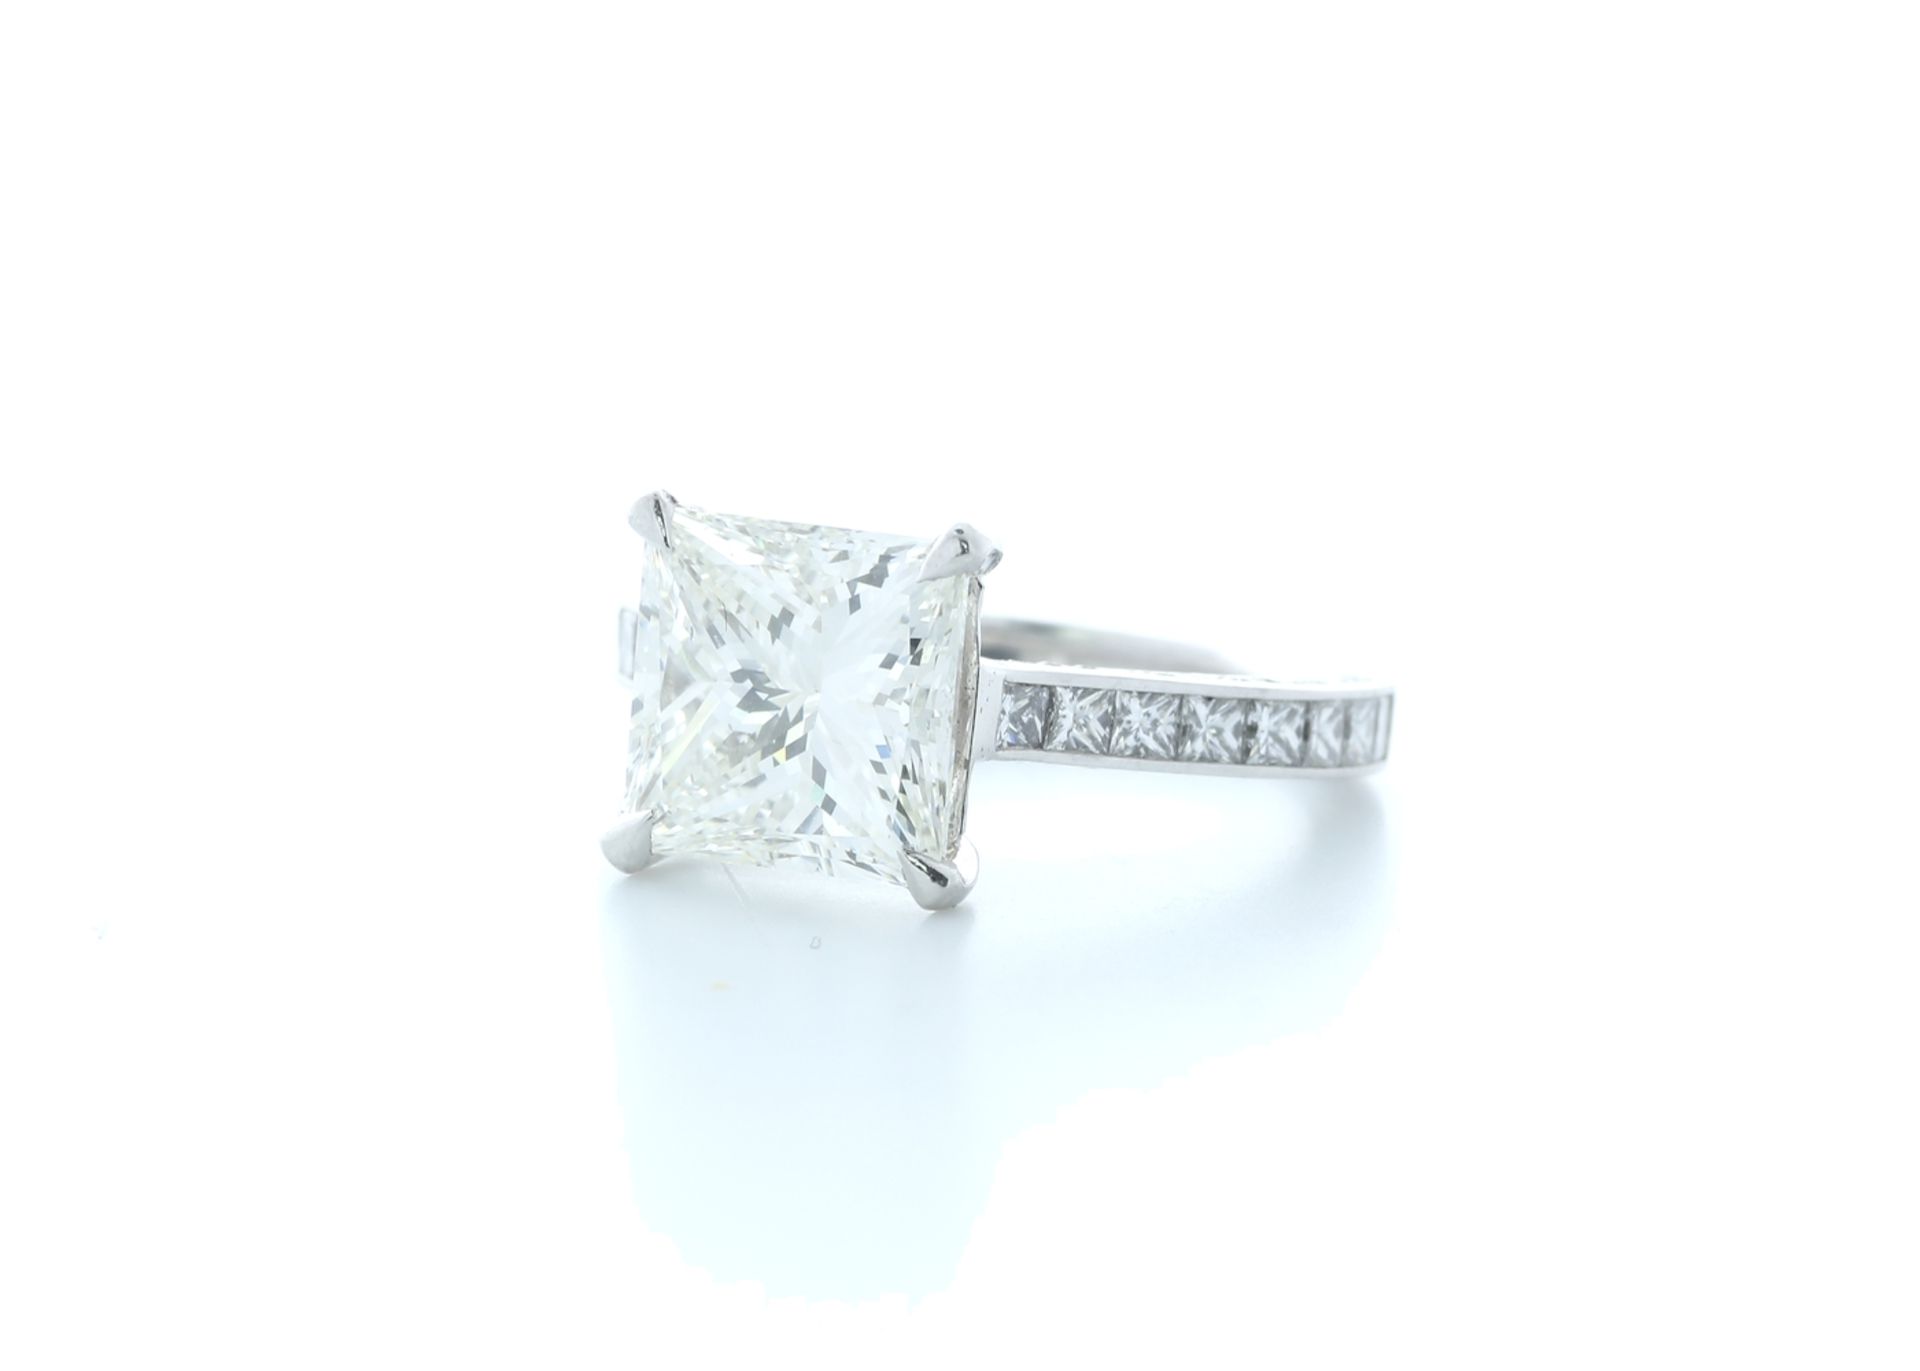 18ct White Gold Princess Cut Diamond Ring 5.13 (4.33) Carats - Valued by IDI £280,000.00 - 18ct - Image 2 of 5